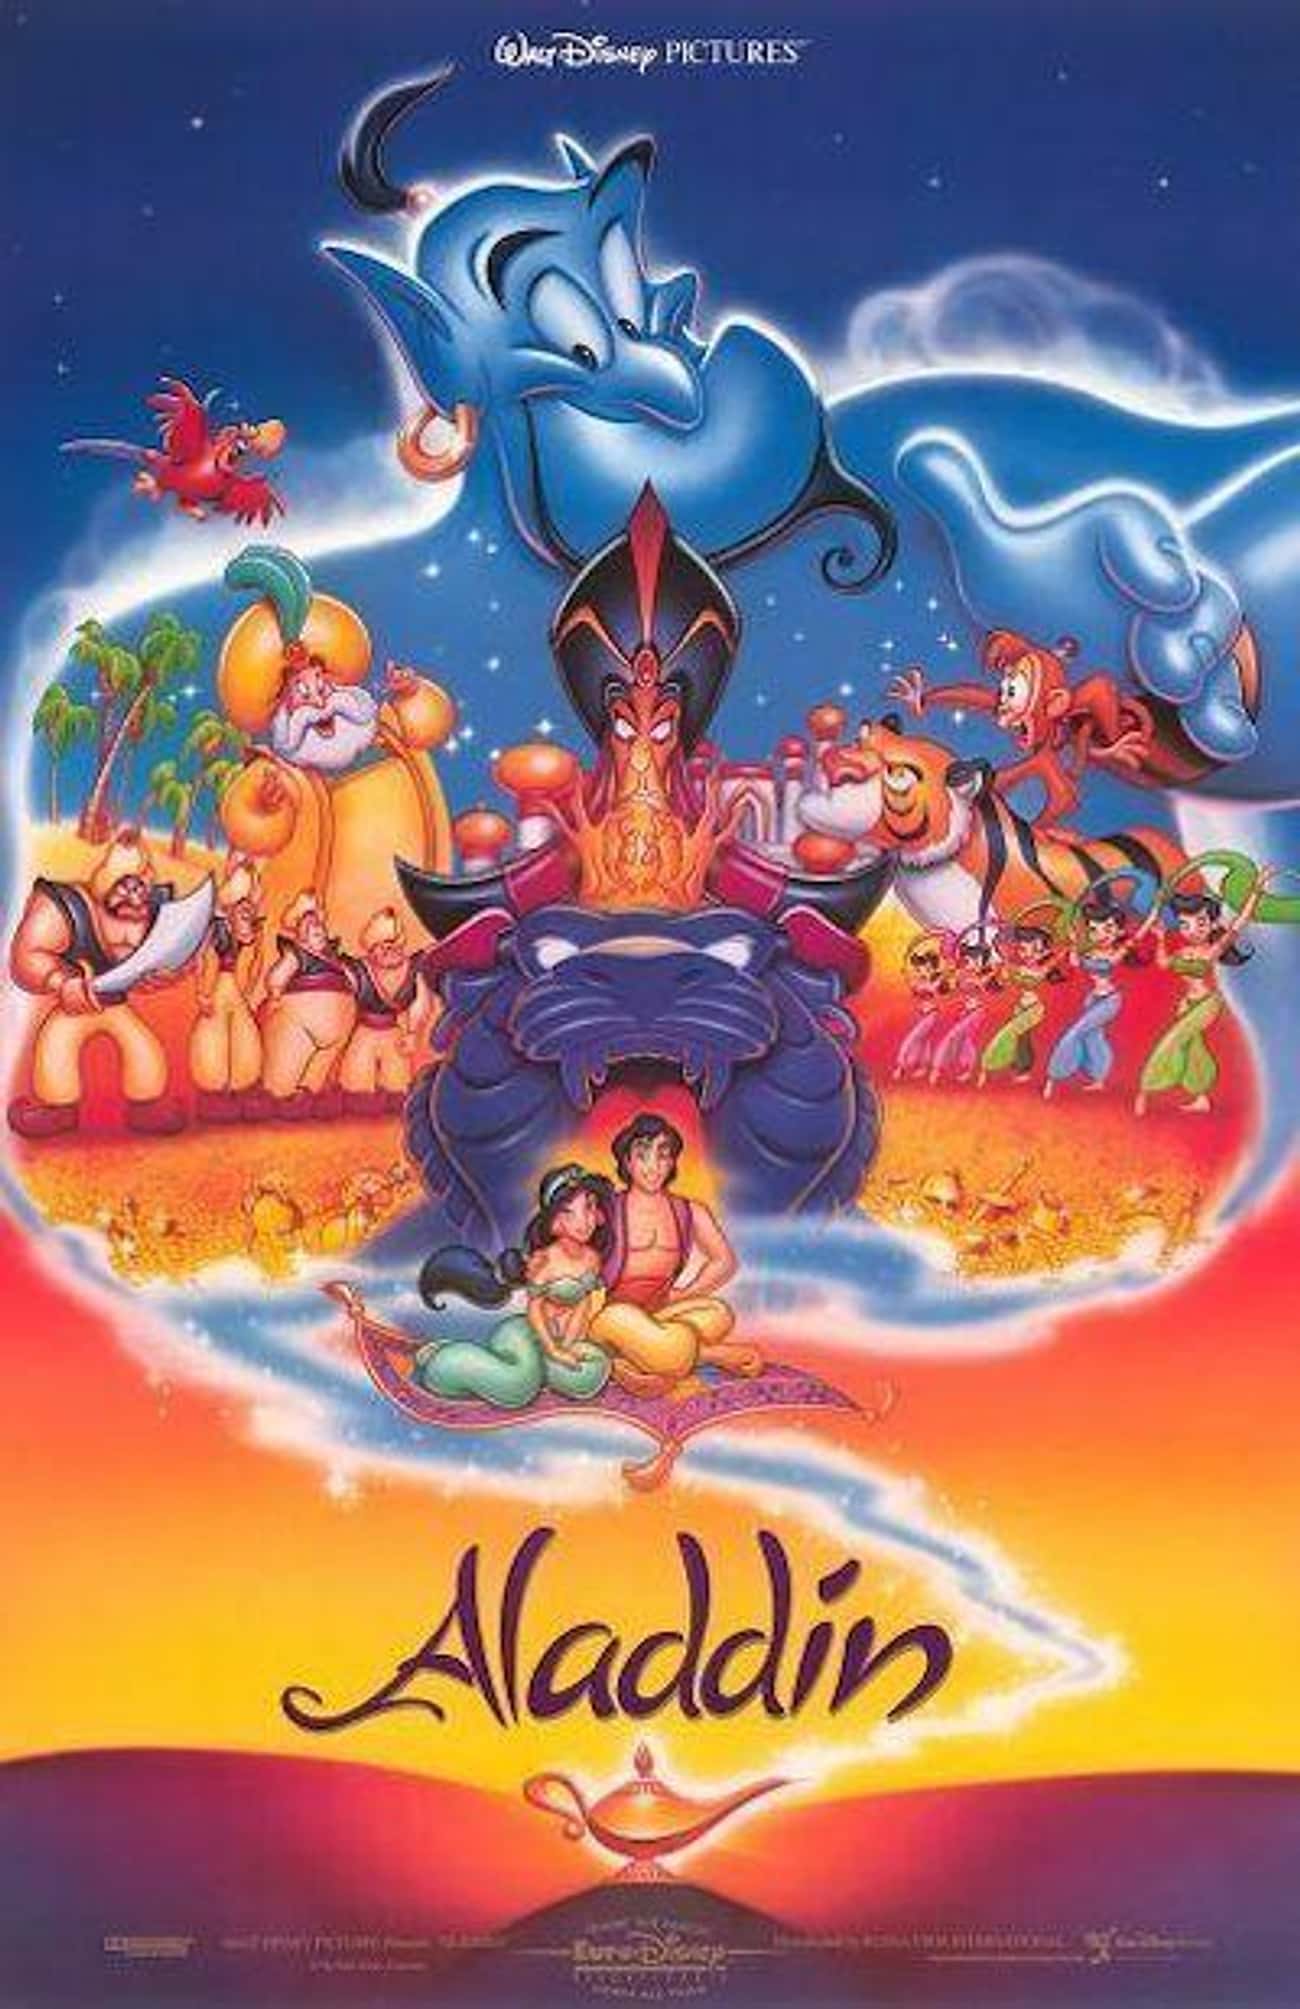 Williams Didn't Like How Disney Marketed 'Aladdin,' So They Gave Him A Million-Dollar Picasso To Make It Up To Him